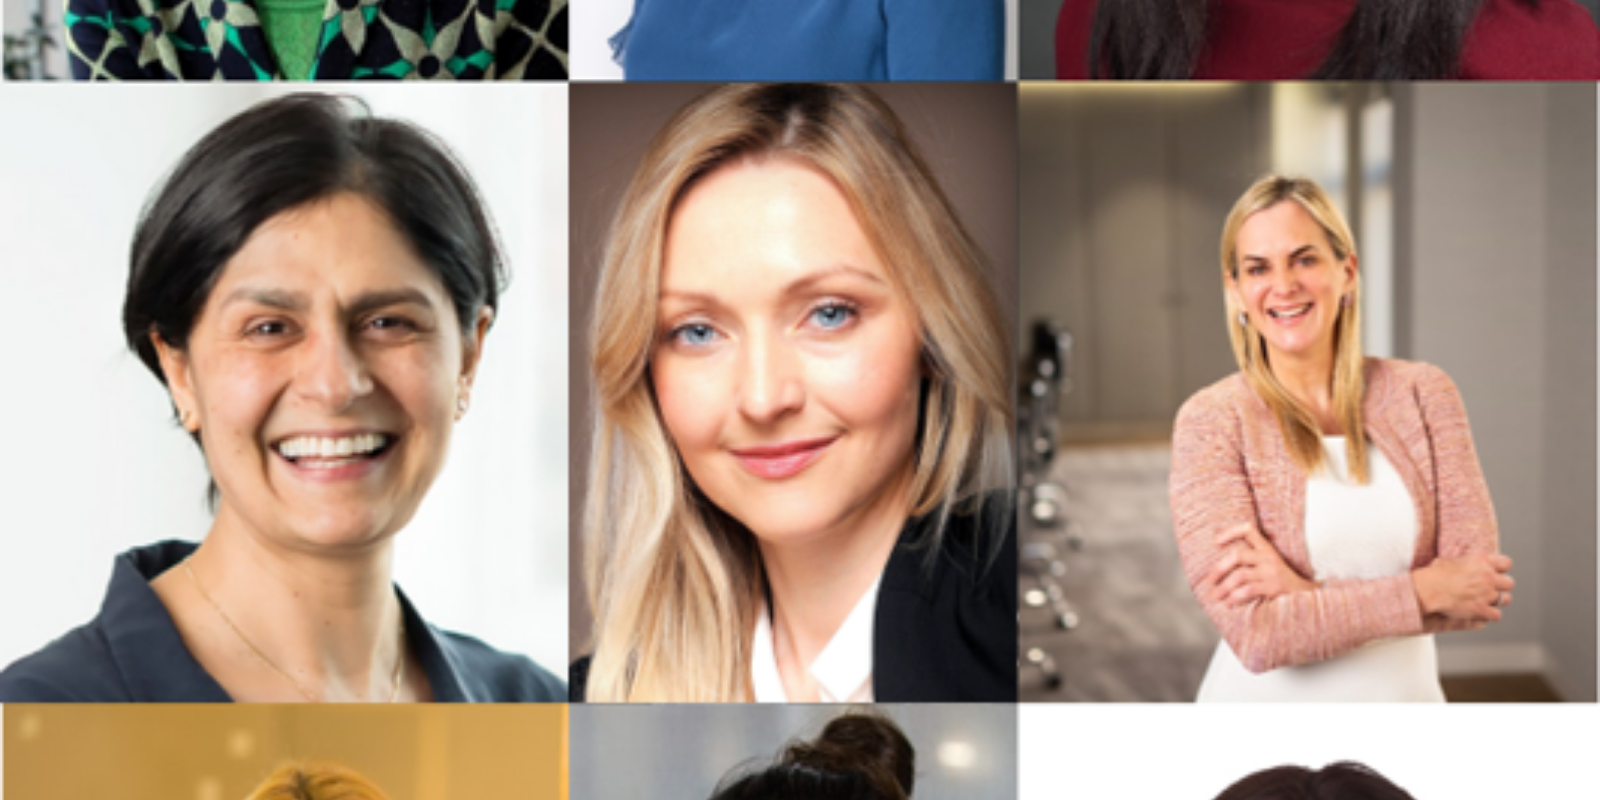 Level 20 selects Ingrid Teigland Akay as one of nine Inspiring Women in European Private Equity